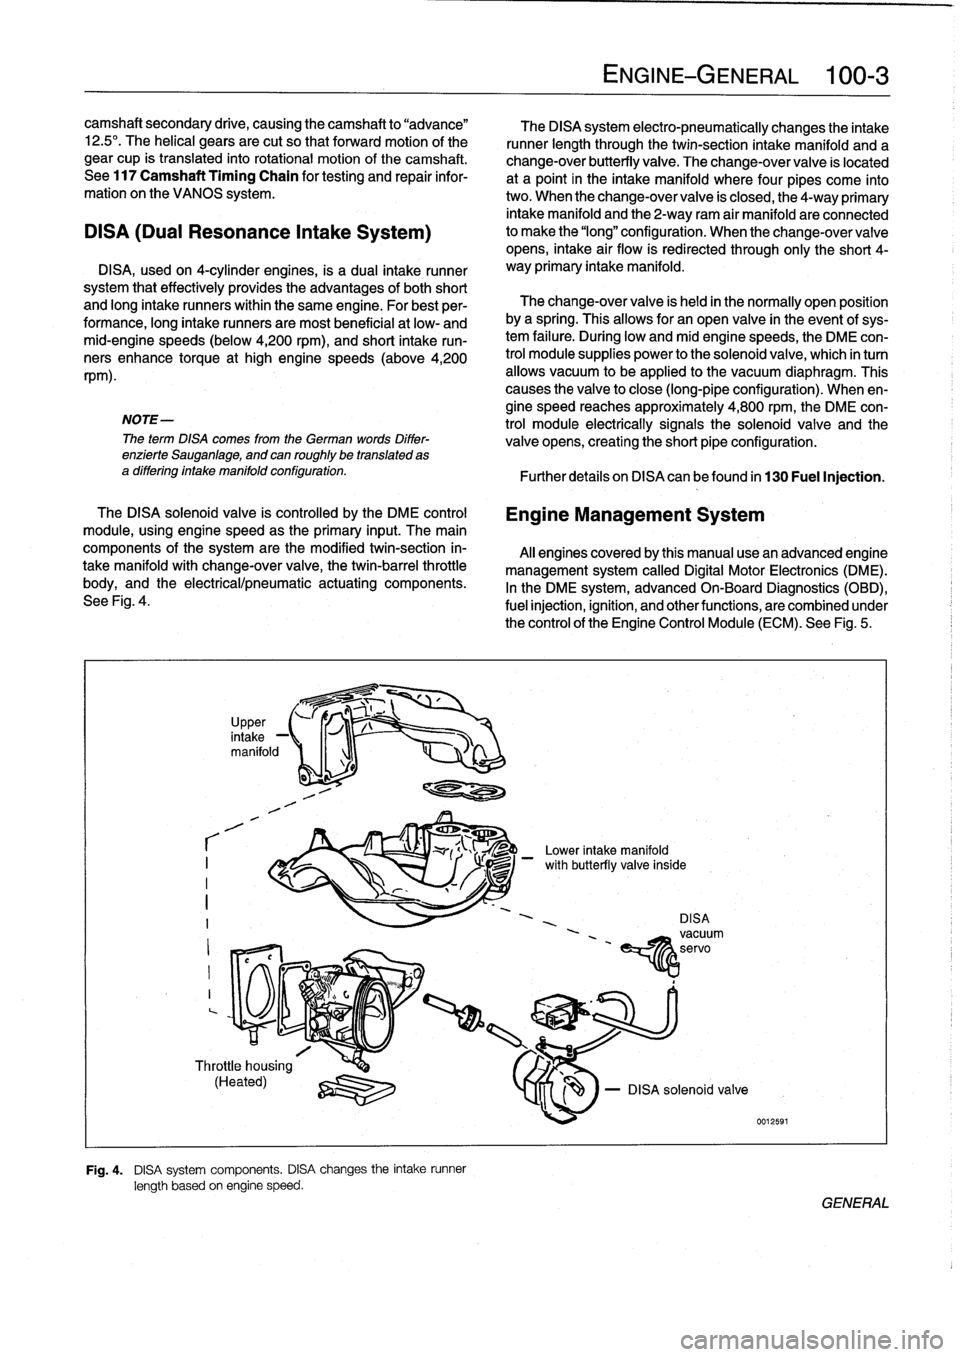 BMW 323i 1998 E36 Workshop Manual camshaft
secondary
drive,
causing
thecamshaft
to
"advance"

12
.5°
.
The
helical
gears
are
cut
so
that
forward
motion
of
the

gear
cup
is
transiated
into
rotational
motion
of
the
camshaft
.

See
117
